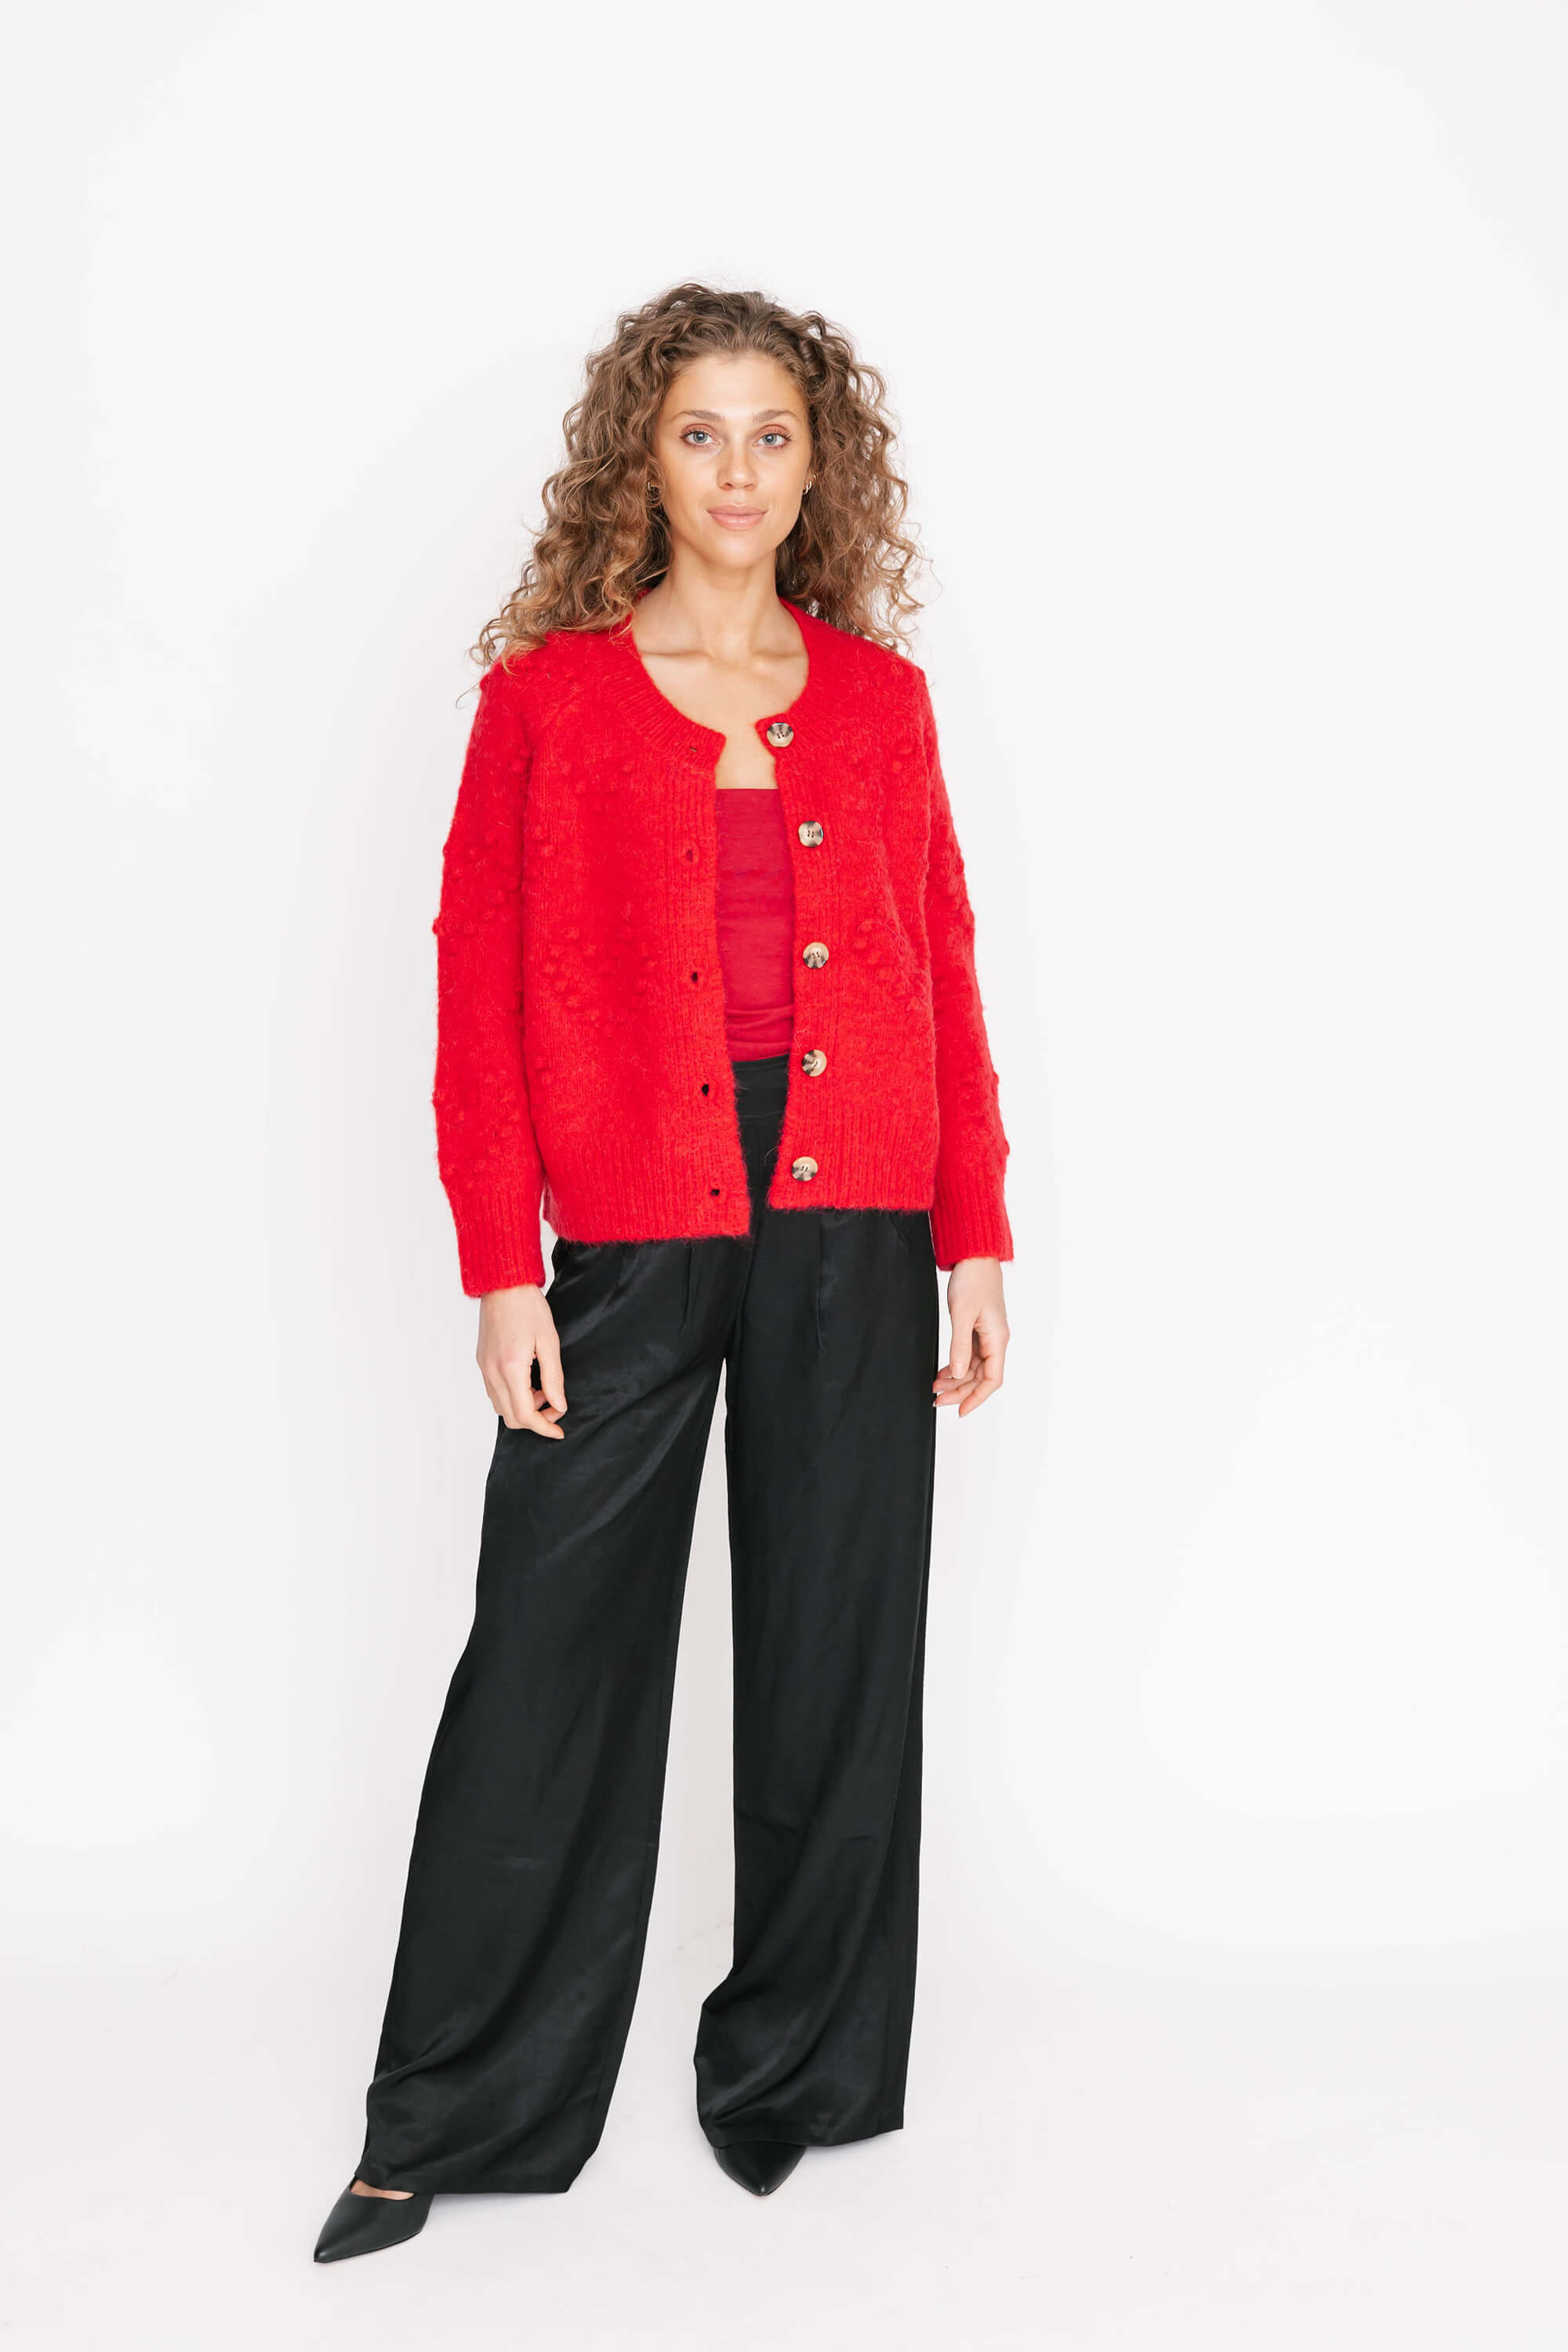 Smash + Tess Bea Bobble Cardigan in Ruby Red